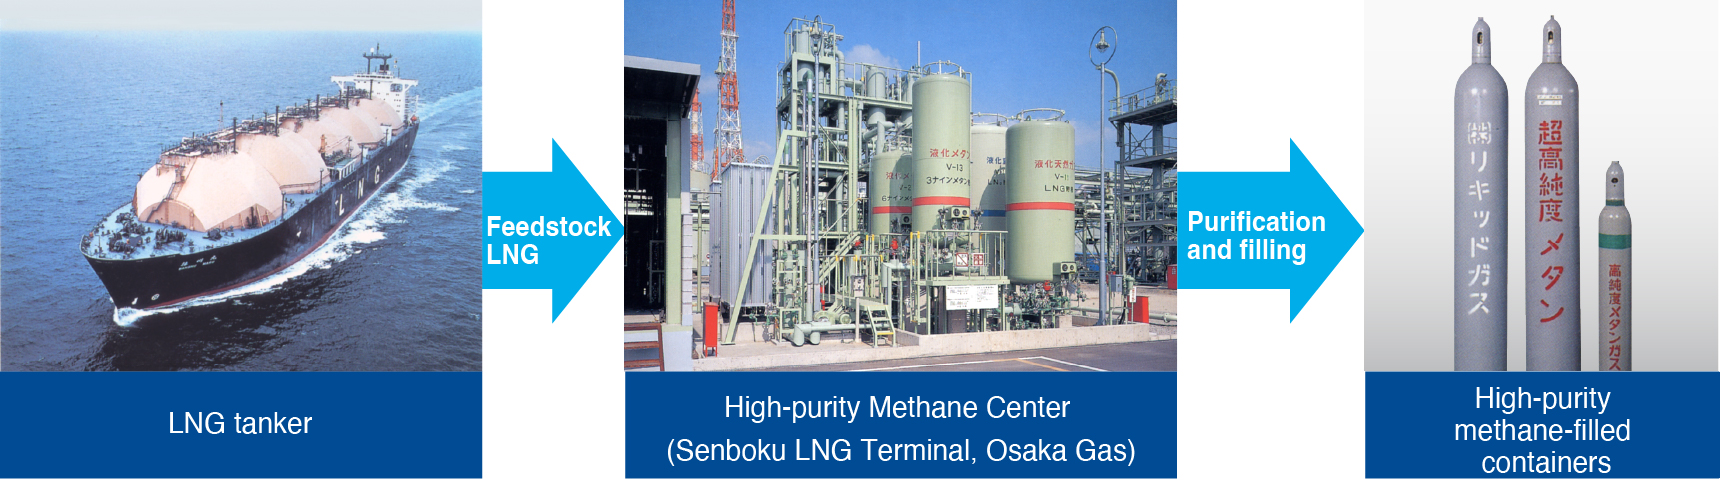 LNG tanker / High-purity methane production plant (Senboku LNG Terminal I, Osaka Gas) / High-purity methane filling containers